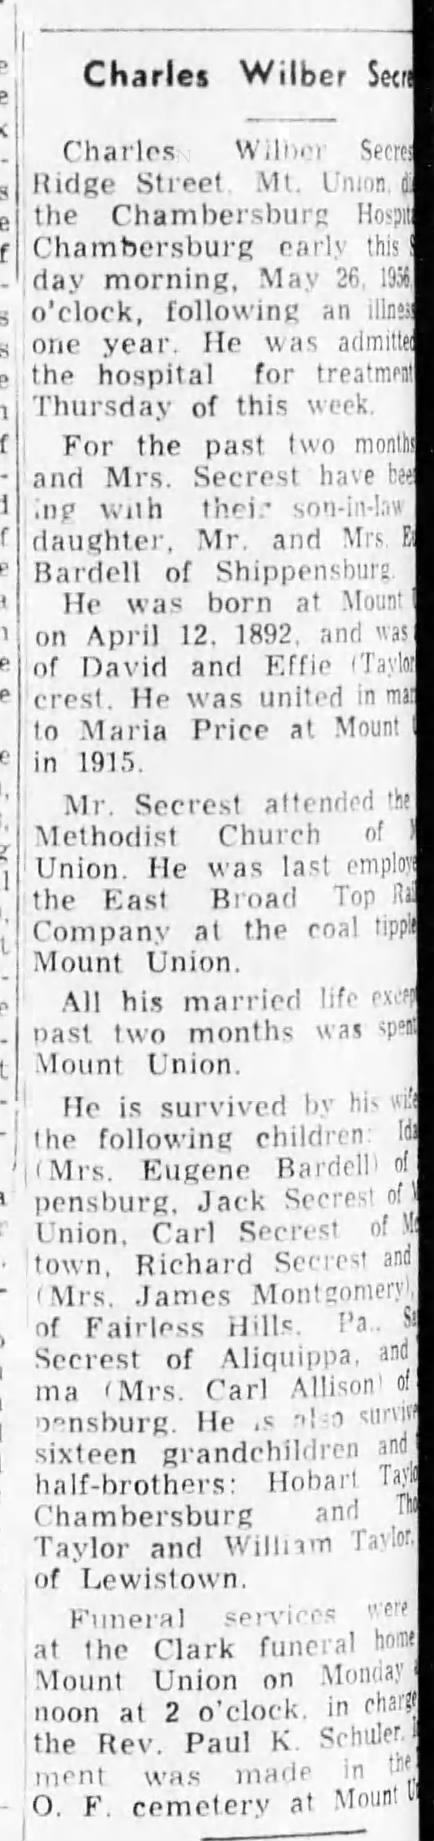 Need completed copy
Charles Wilber Secrest 
1 June 1956
Mount Union Times, Pa